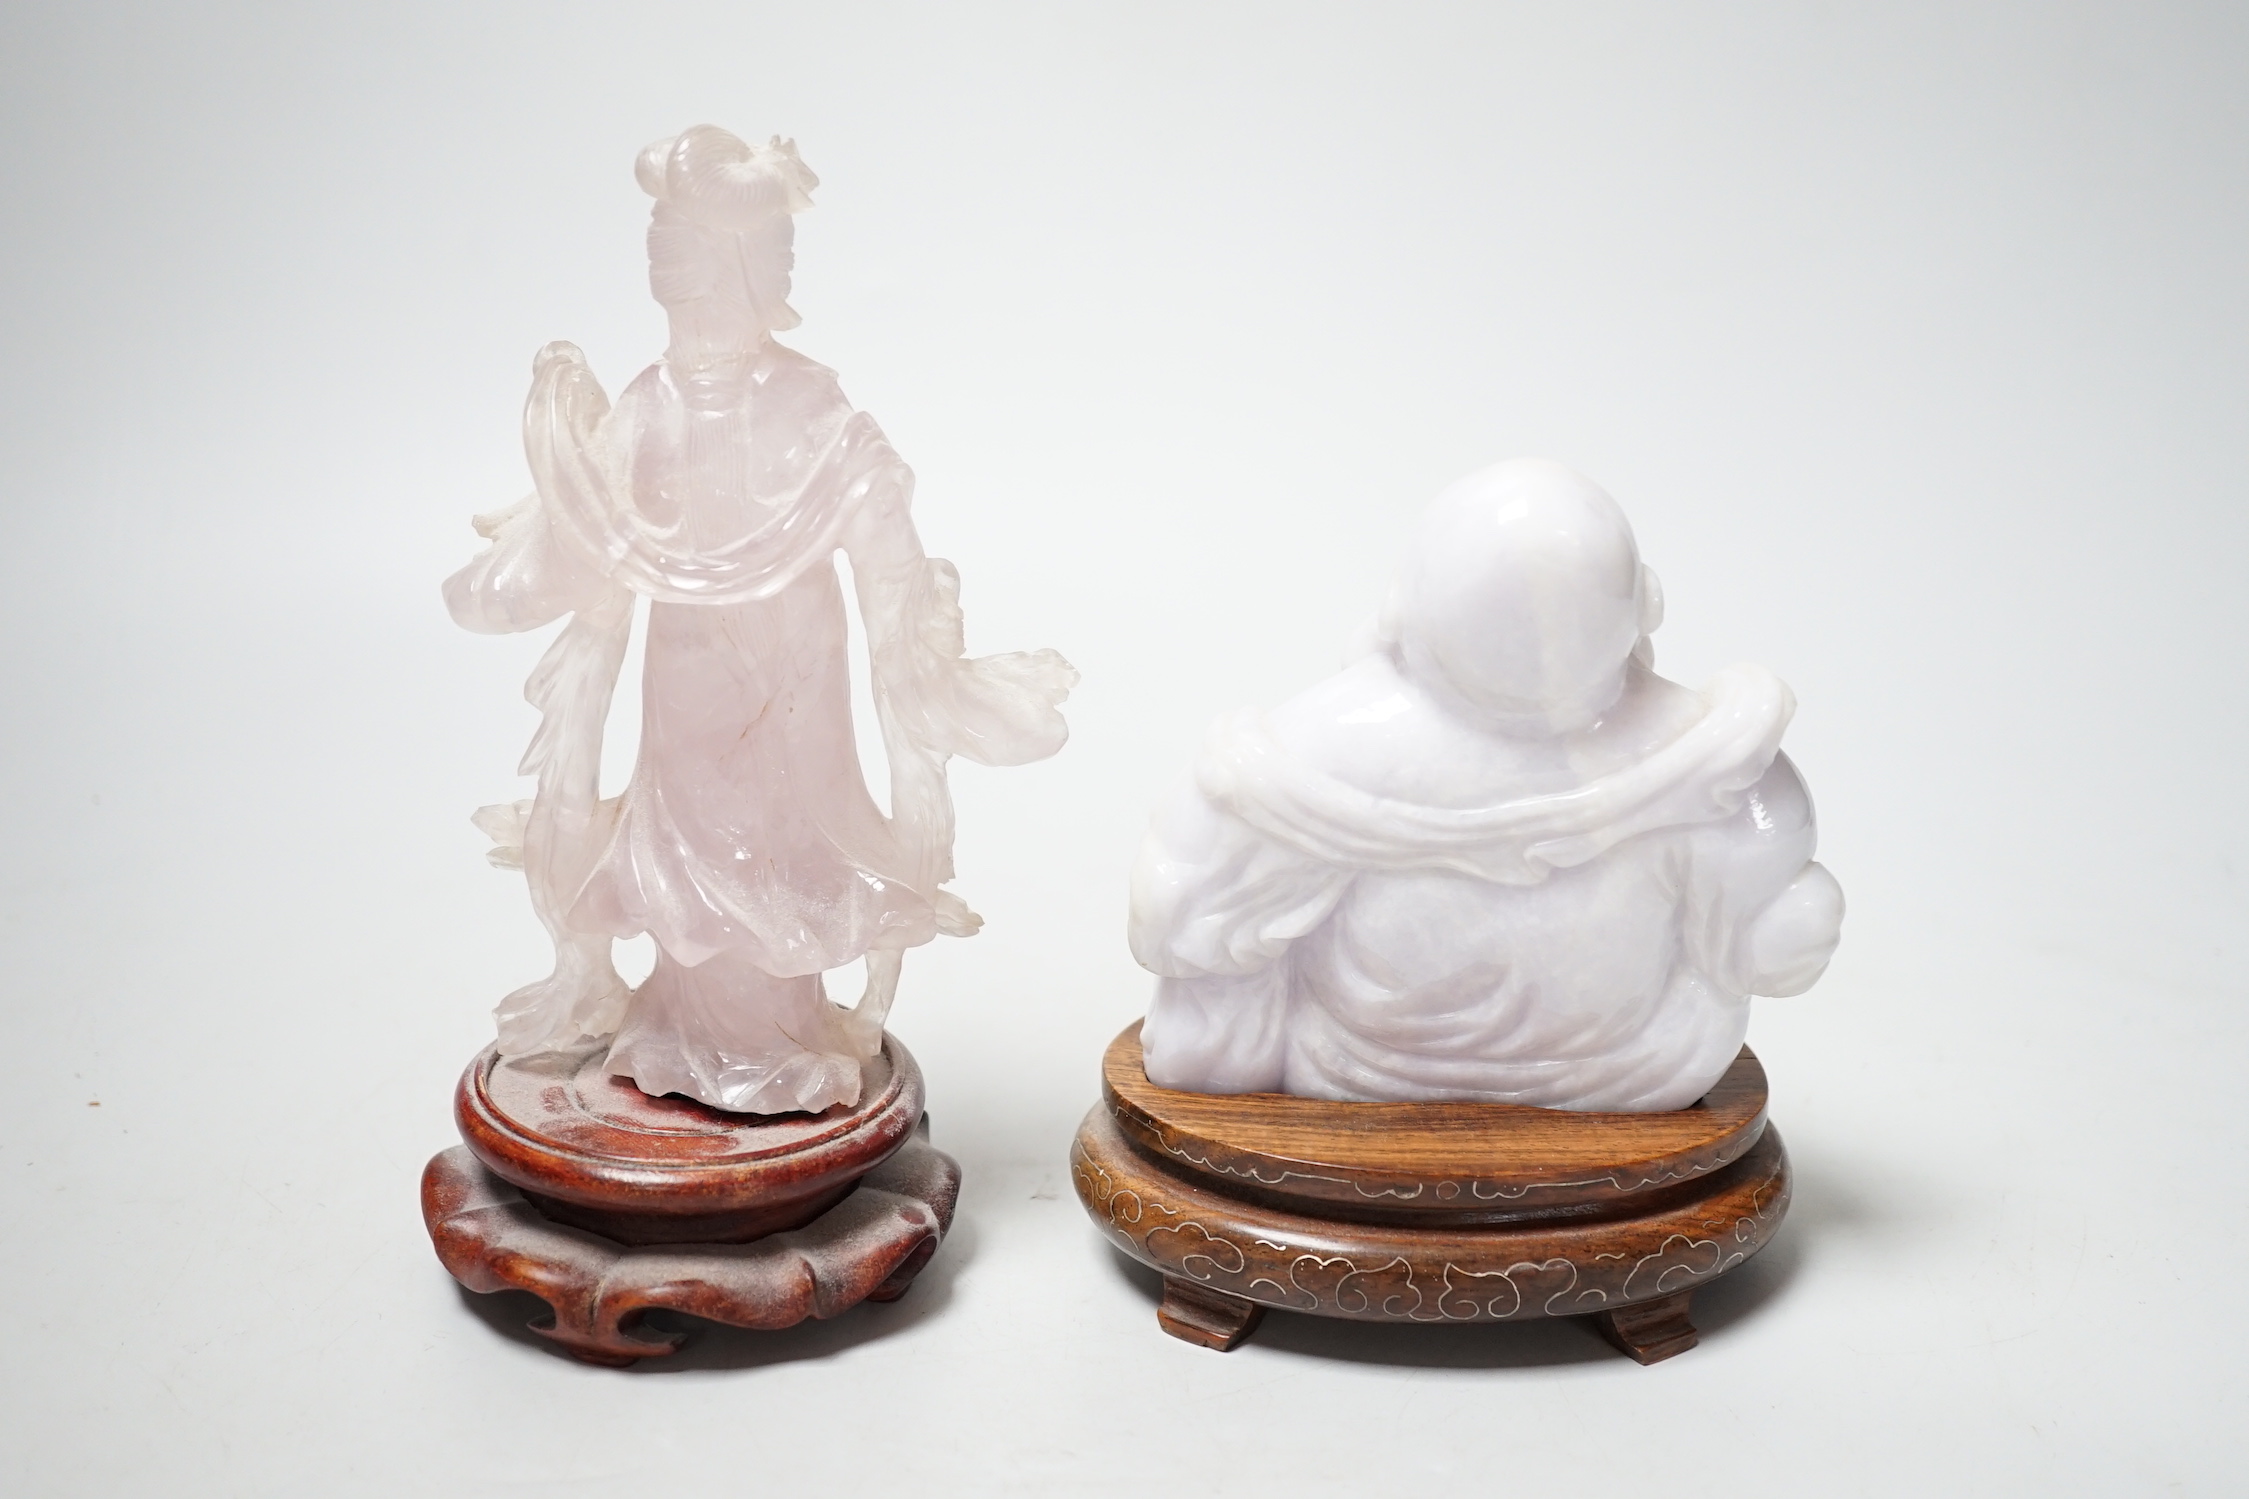 A Chinese jadeite figure of Budai, 11cm high and a rose quartz figure of a lady, wood stands - Image 4 of 4